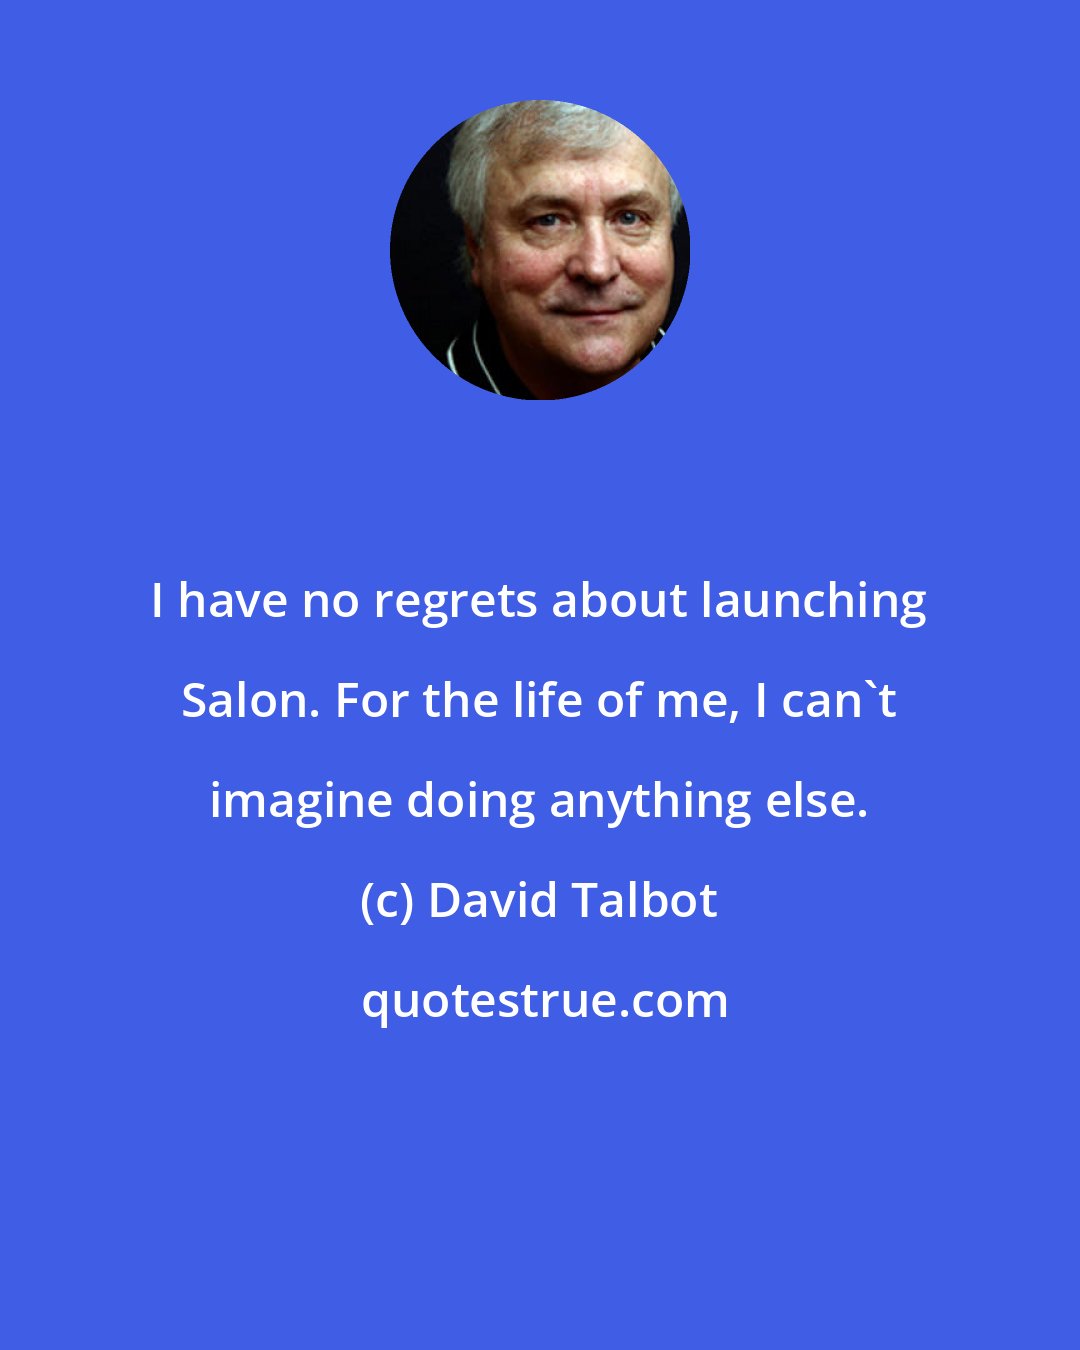 David Talbot: I have no regrets about launching Salon. For the life of me, I can't imagine doing anything else.